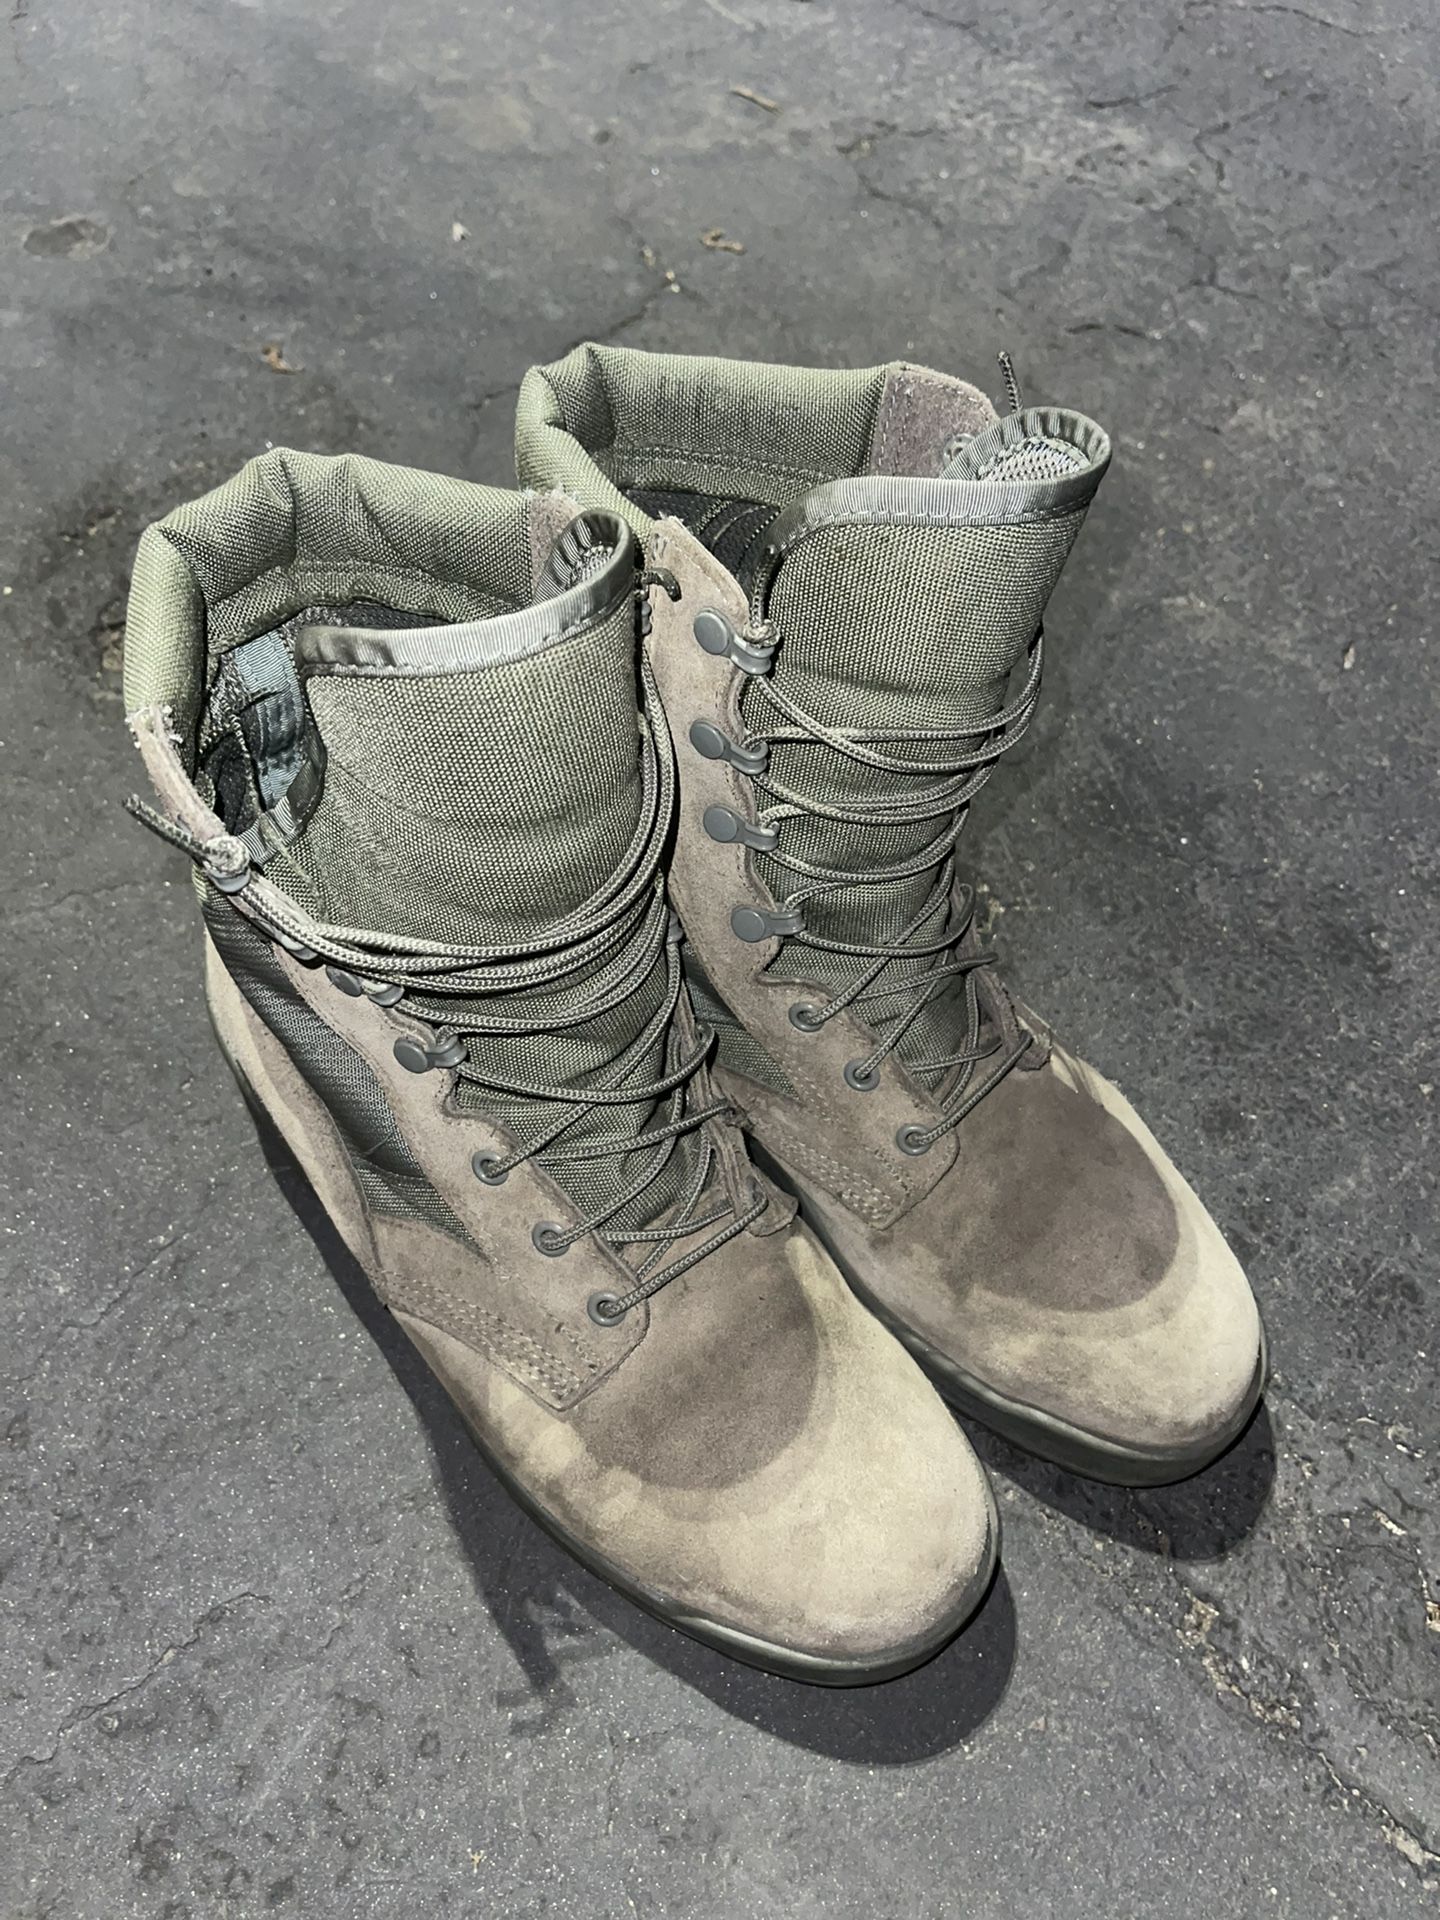 Air force Issued Boots